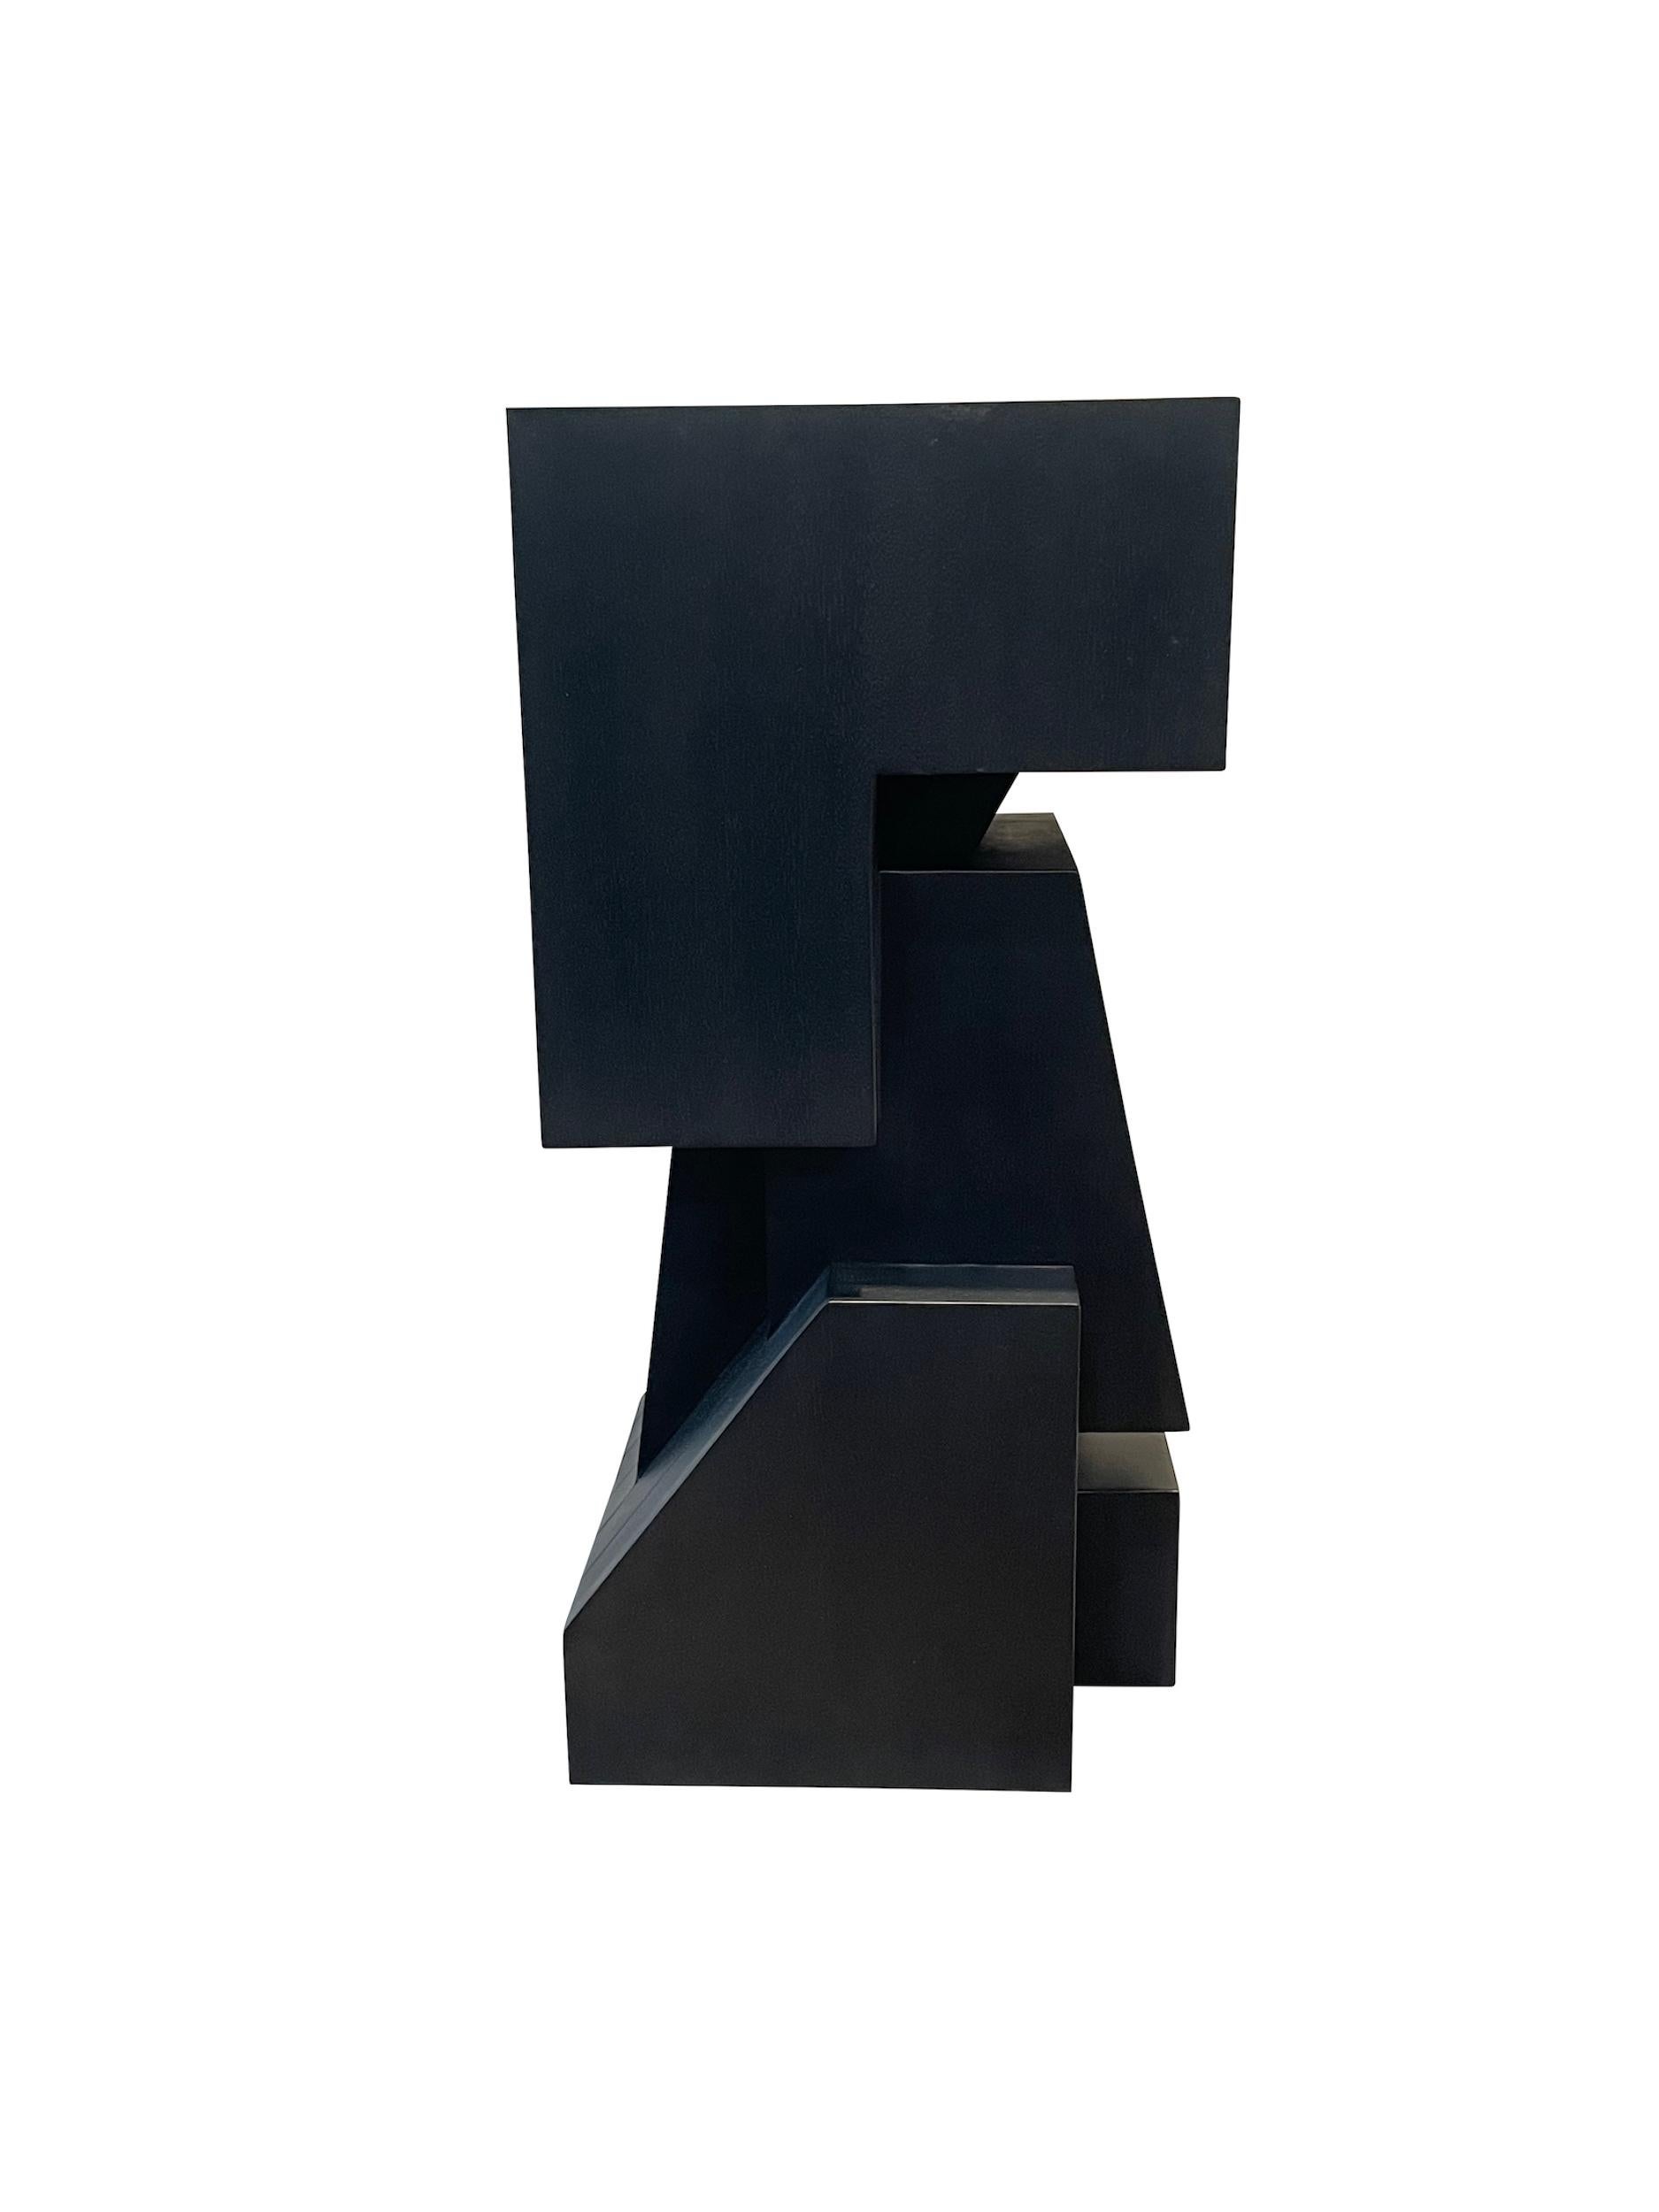 Abstract Wood Sculpture By Levi Hawken, New Zealand, Contemporary In New Condition For Sale In New York, NY